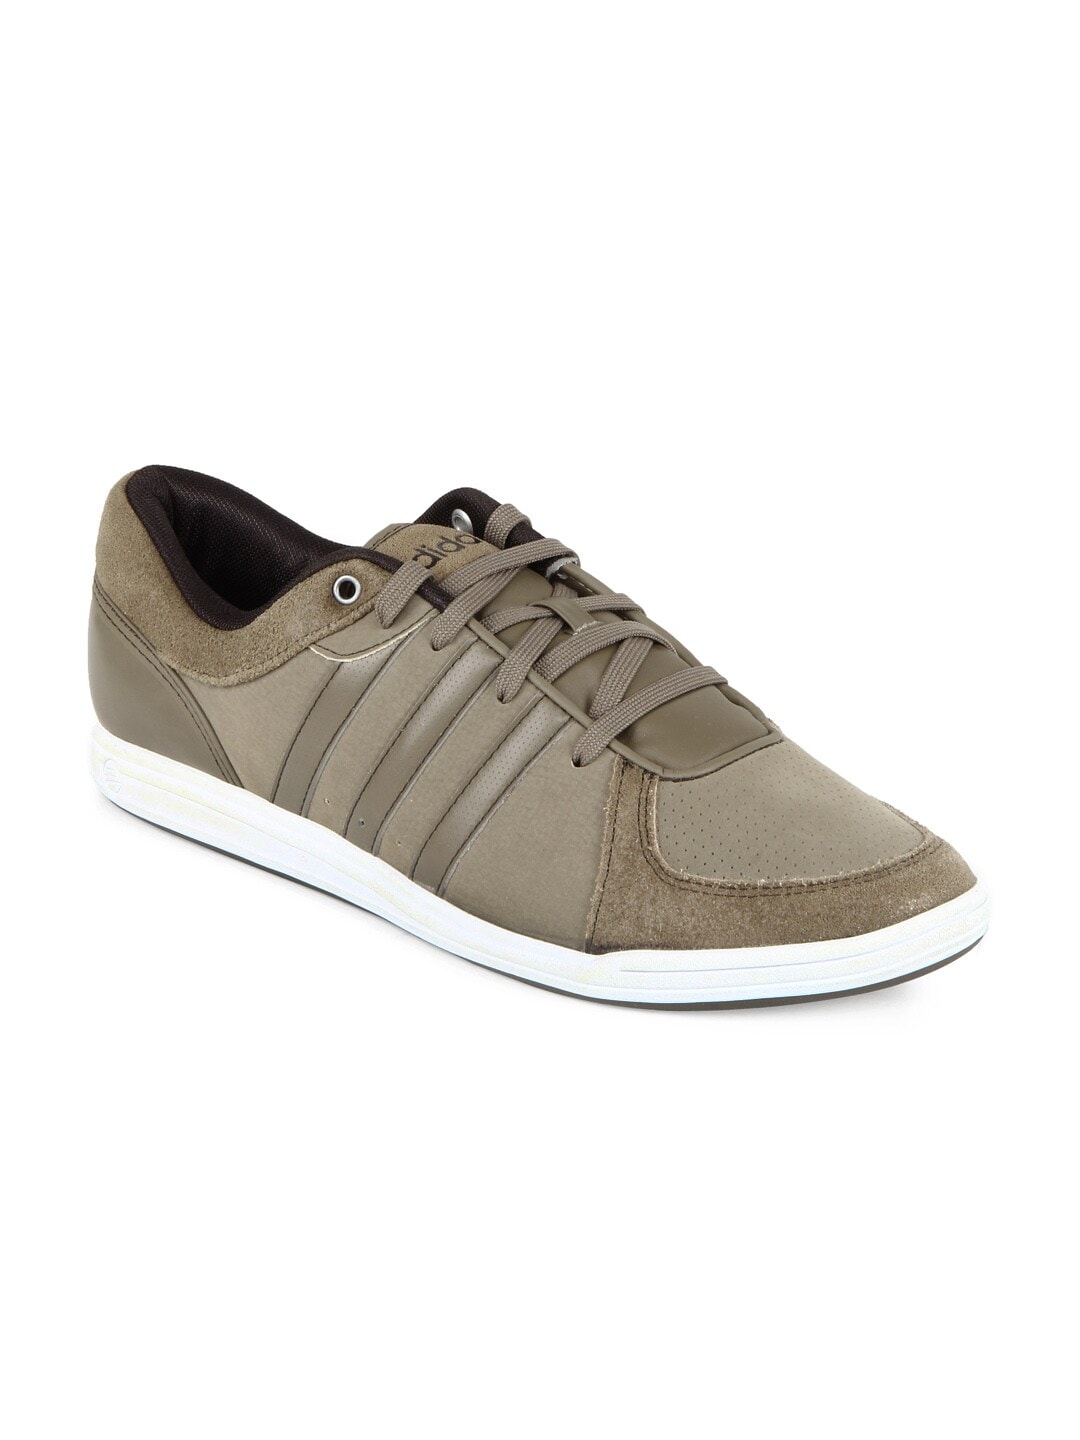 ADIDAS Men Court Sequence Brown Shoes